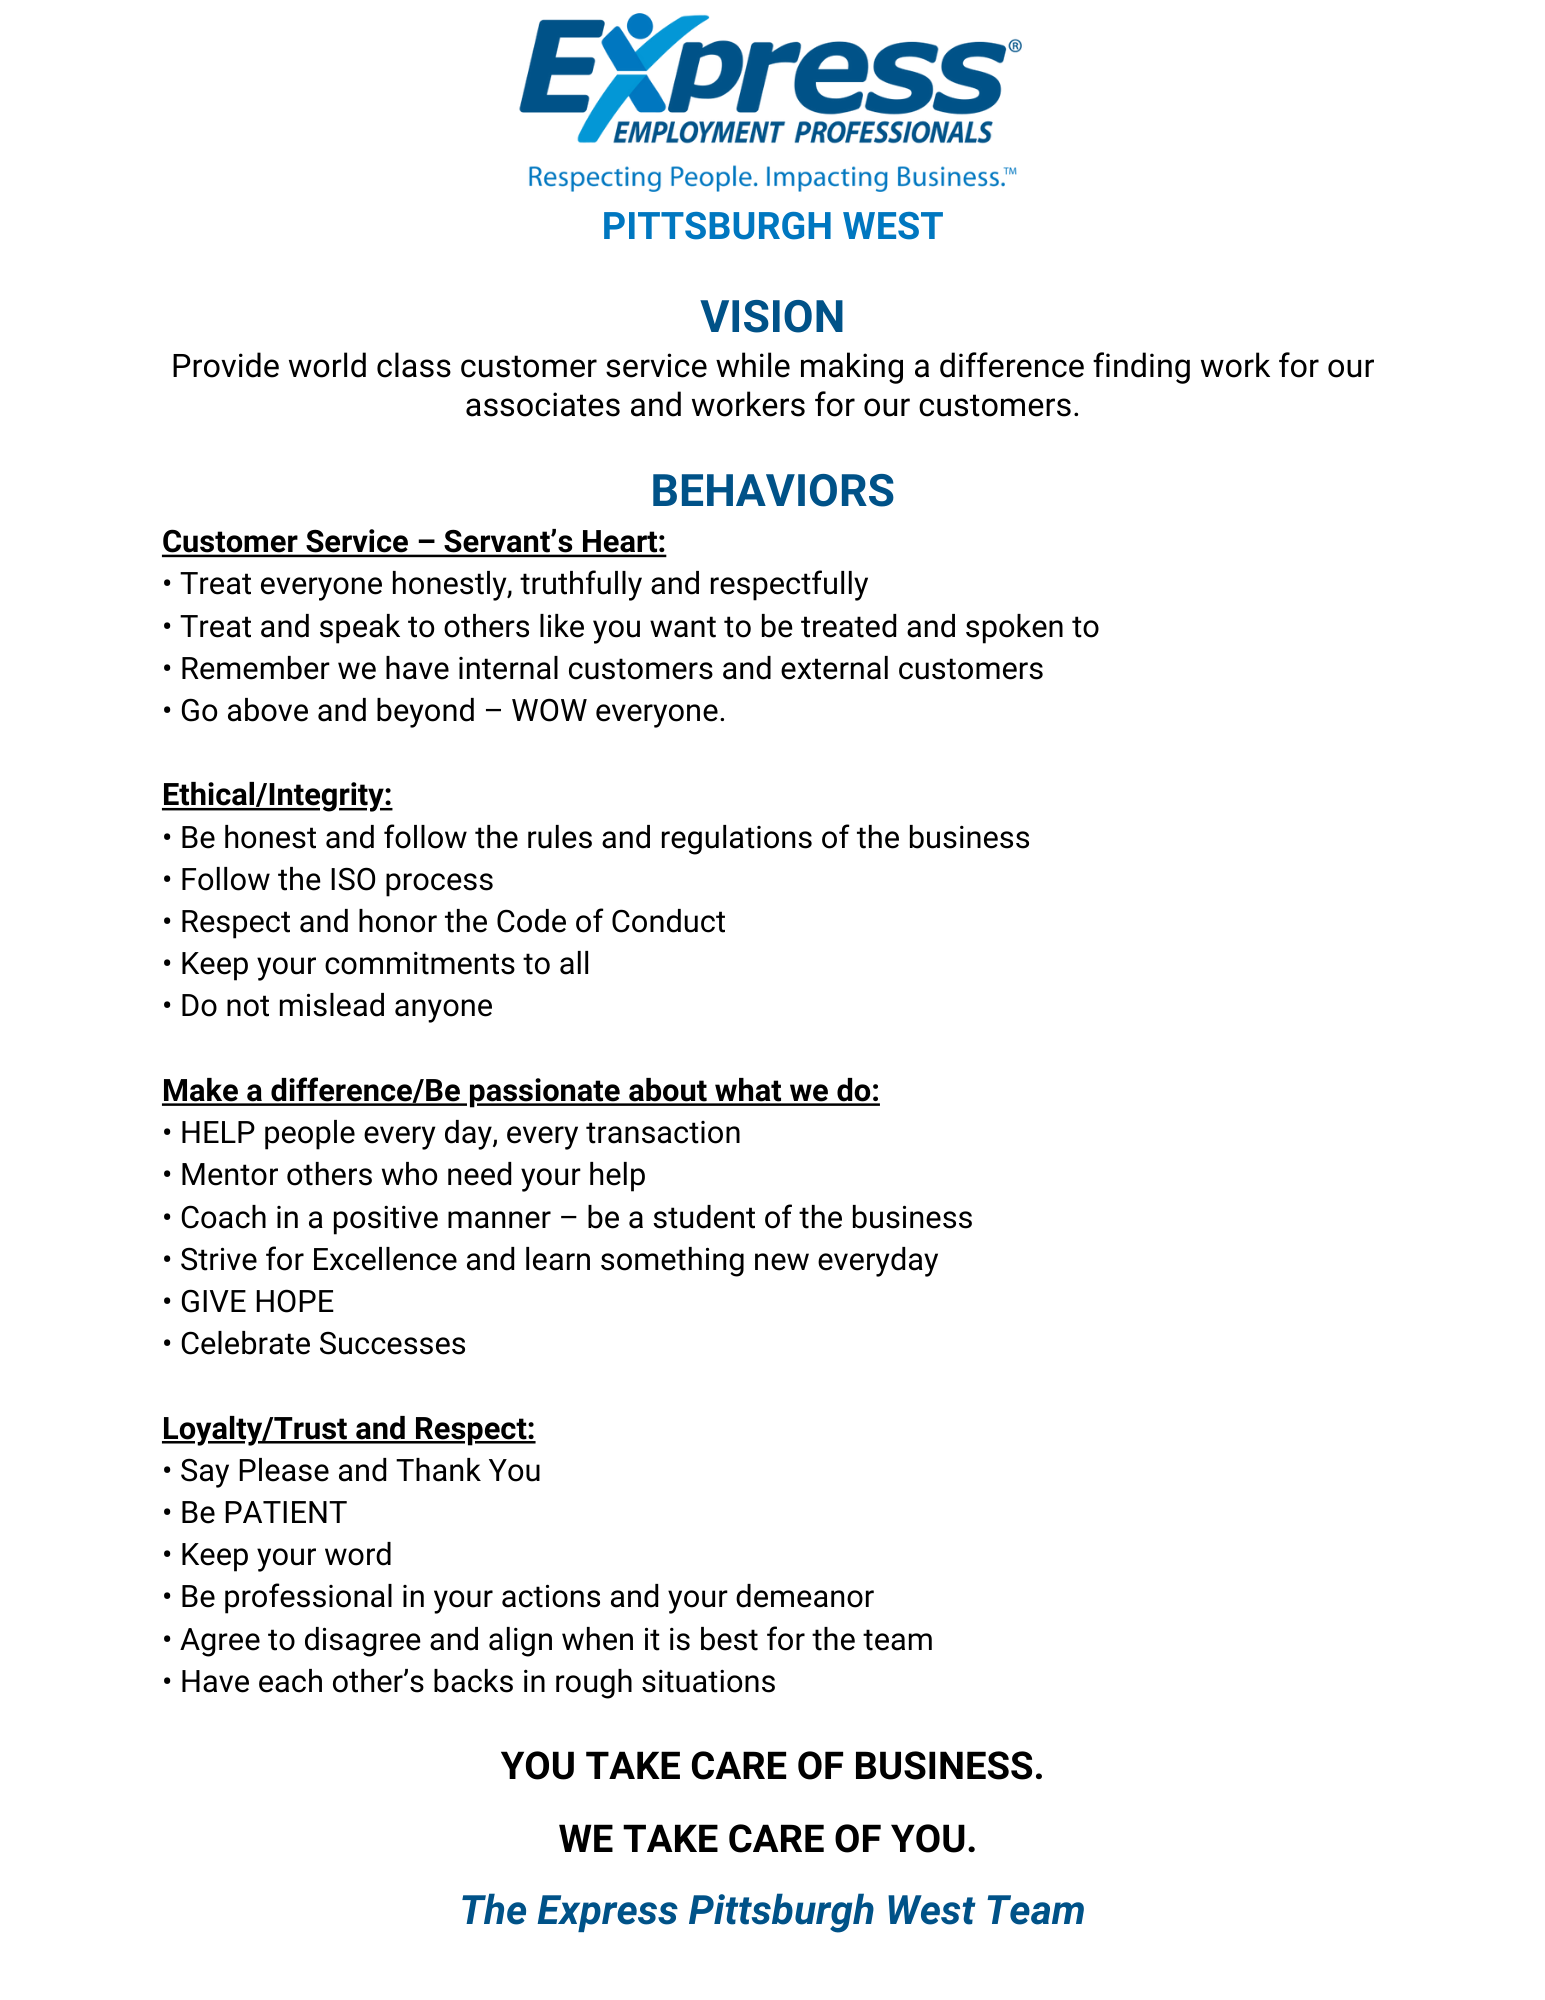 07-15-24 Vision and Behaviors.2